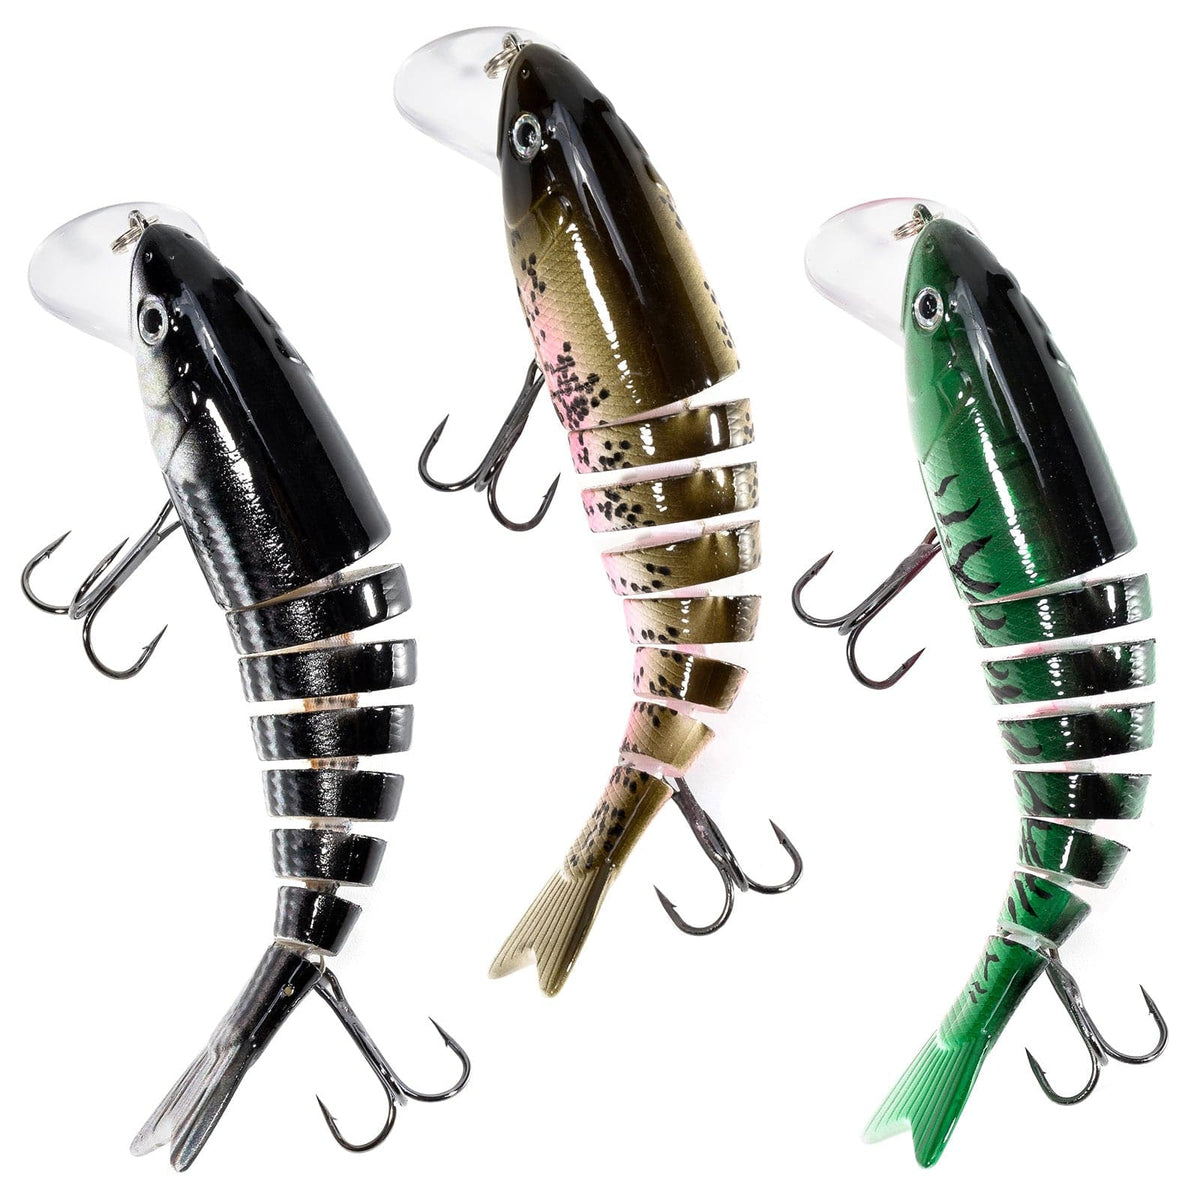 Dr.Fish 3pcs Multi Jointed Fishing Lures